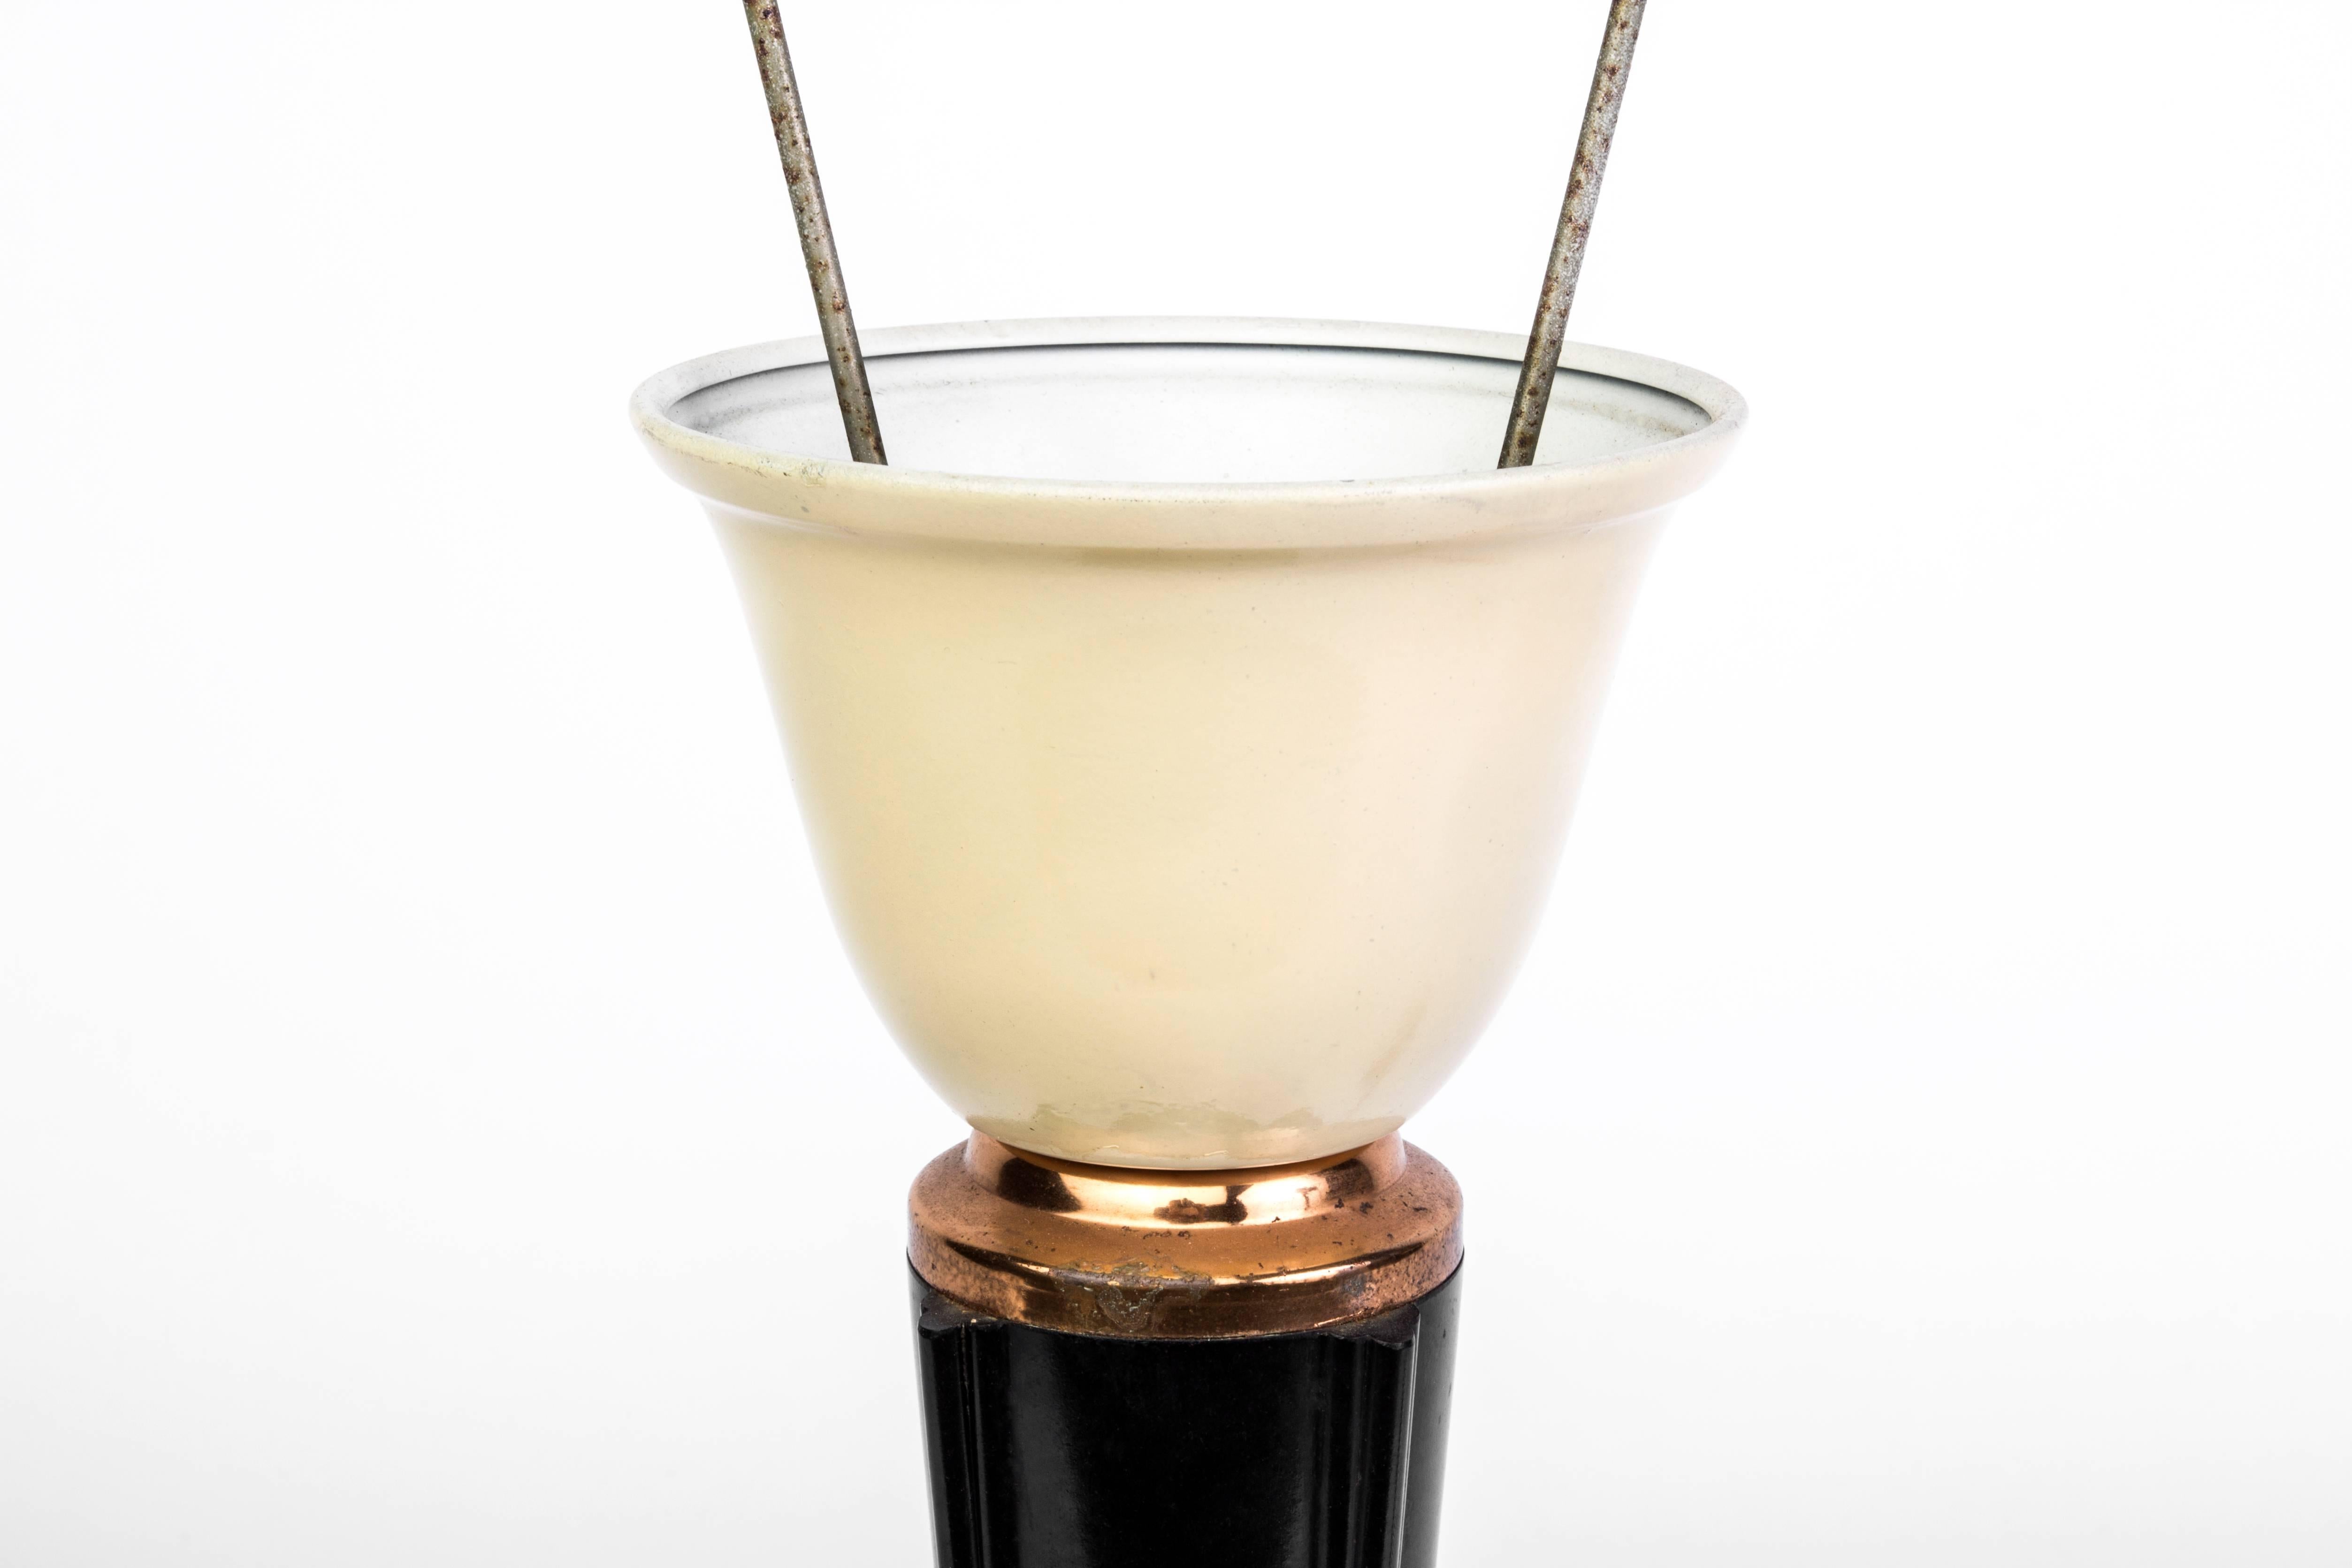 This wonderful Art Deco lame was designed by Jumo. It features a mushroom form design with a bakelite shade, brass detailing and a high gloss black lacquer finish. It is in excellent condition and has been newly rewired.

Made in France, circa